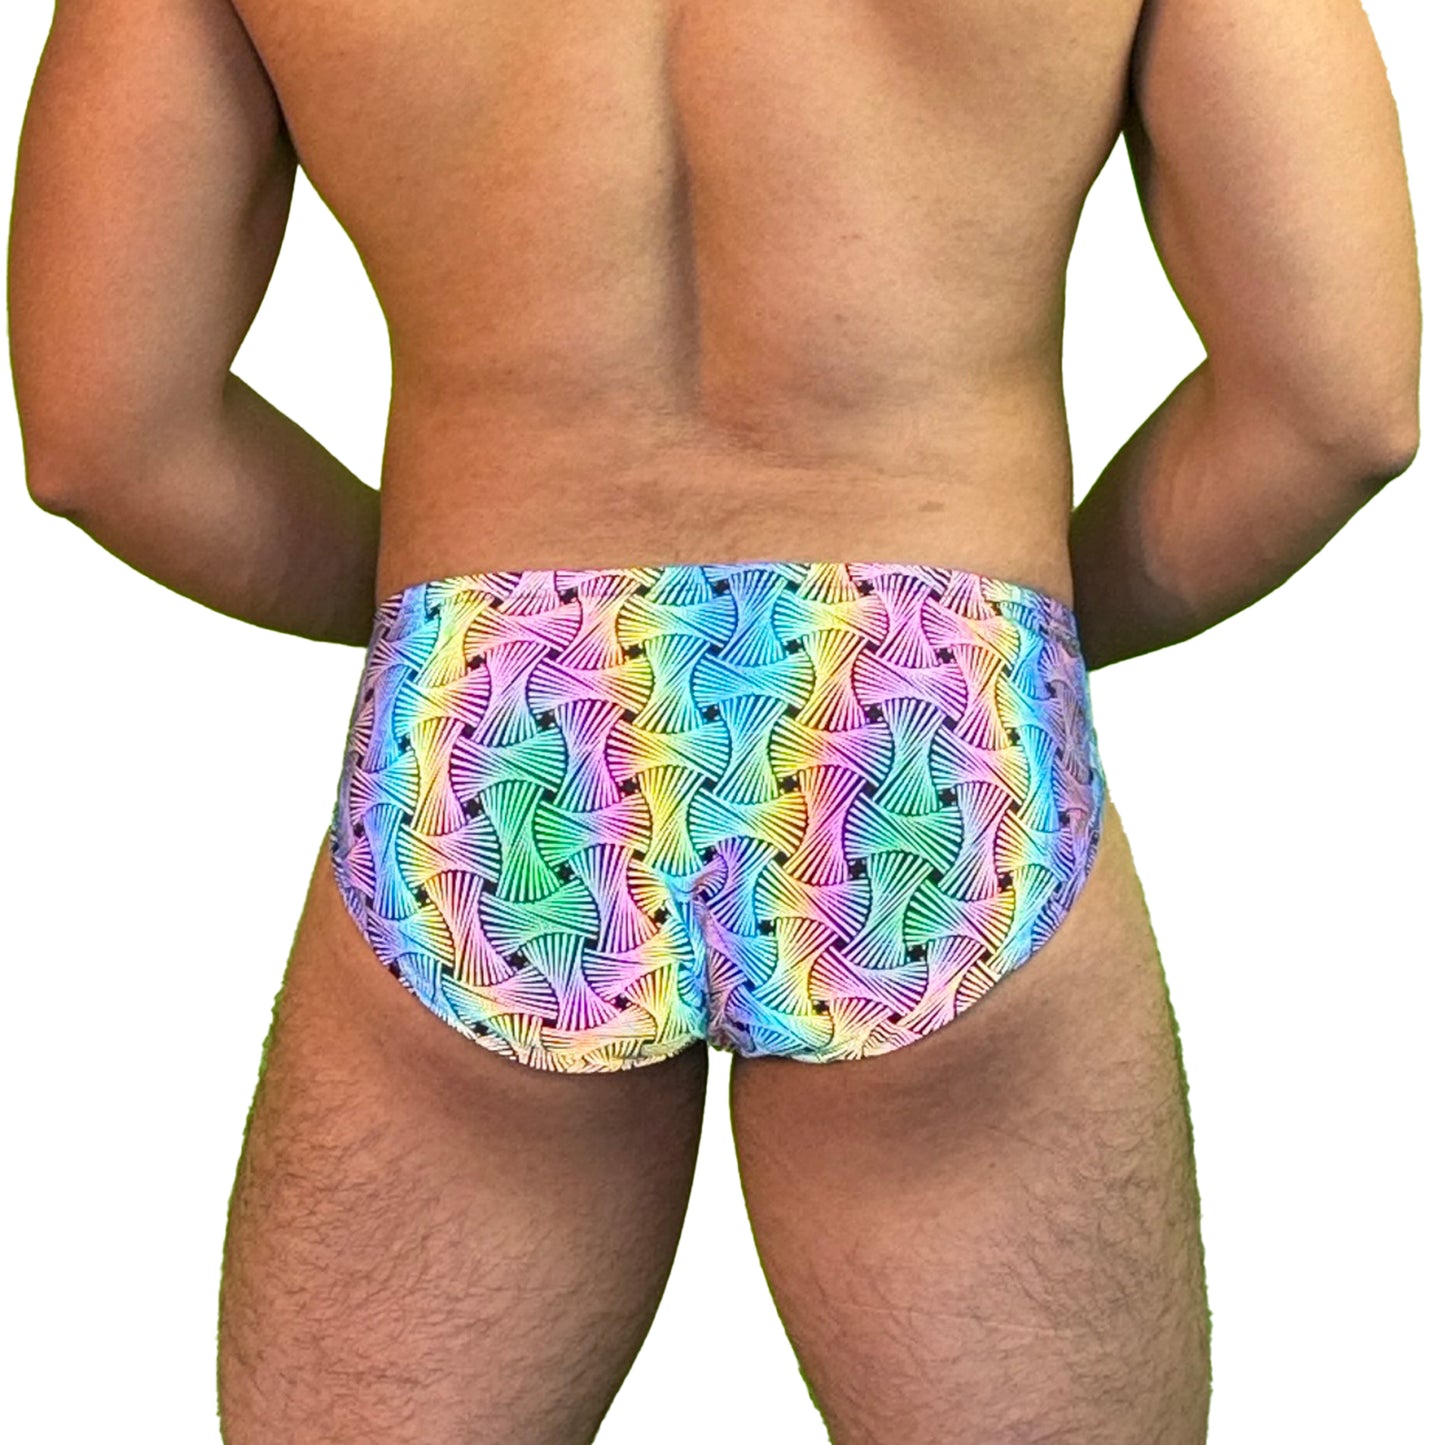 Party Bottoms - Reflective Loom Classic Cut Party & Swim Brief